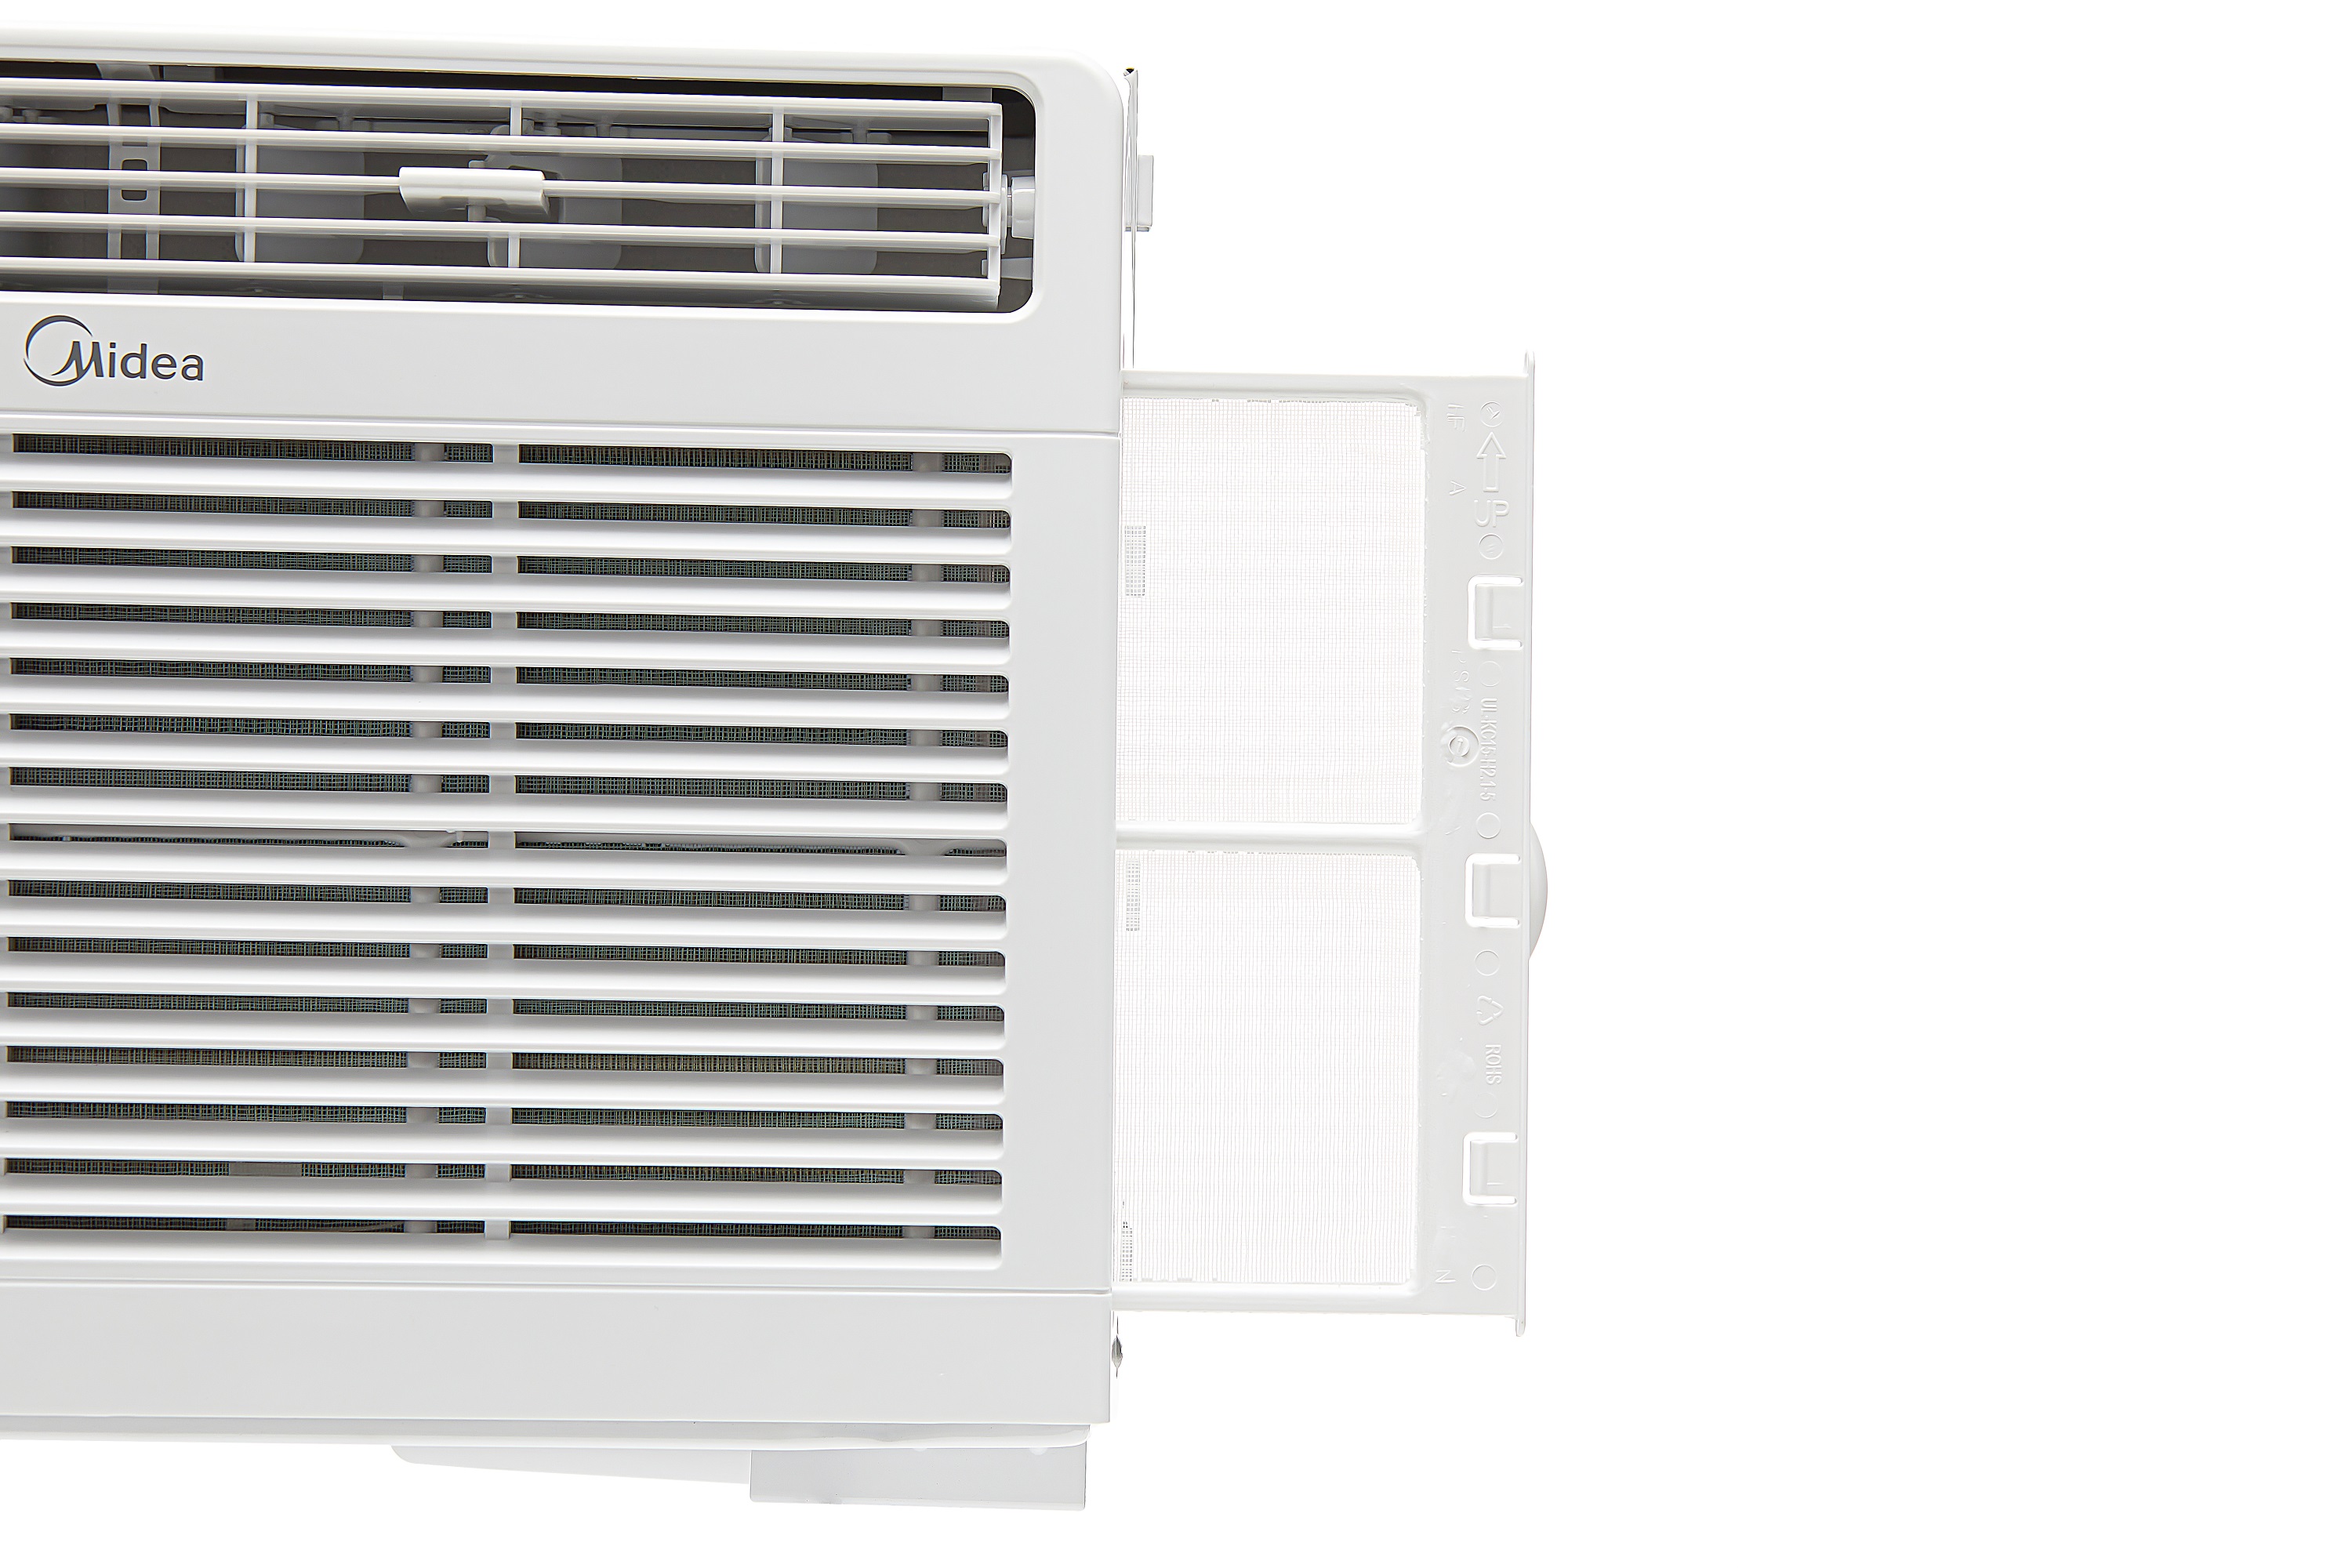 Midea 5,000 BTU 150 Sq Ft Mechanical Window Air Conditioner, White, MAW05M1WWT - image 15 of 17